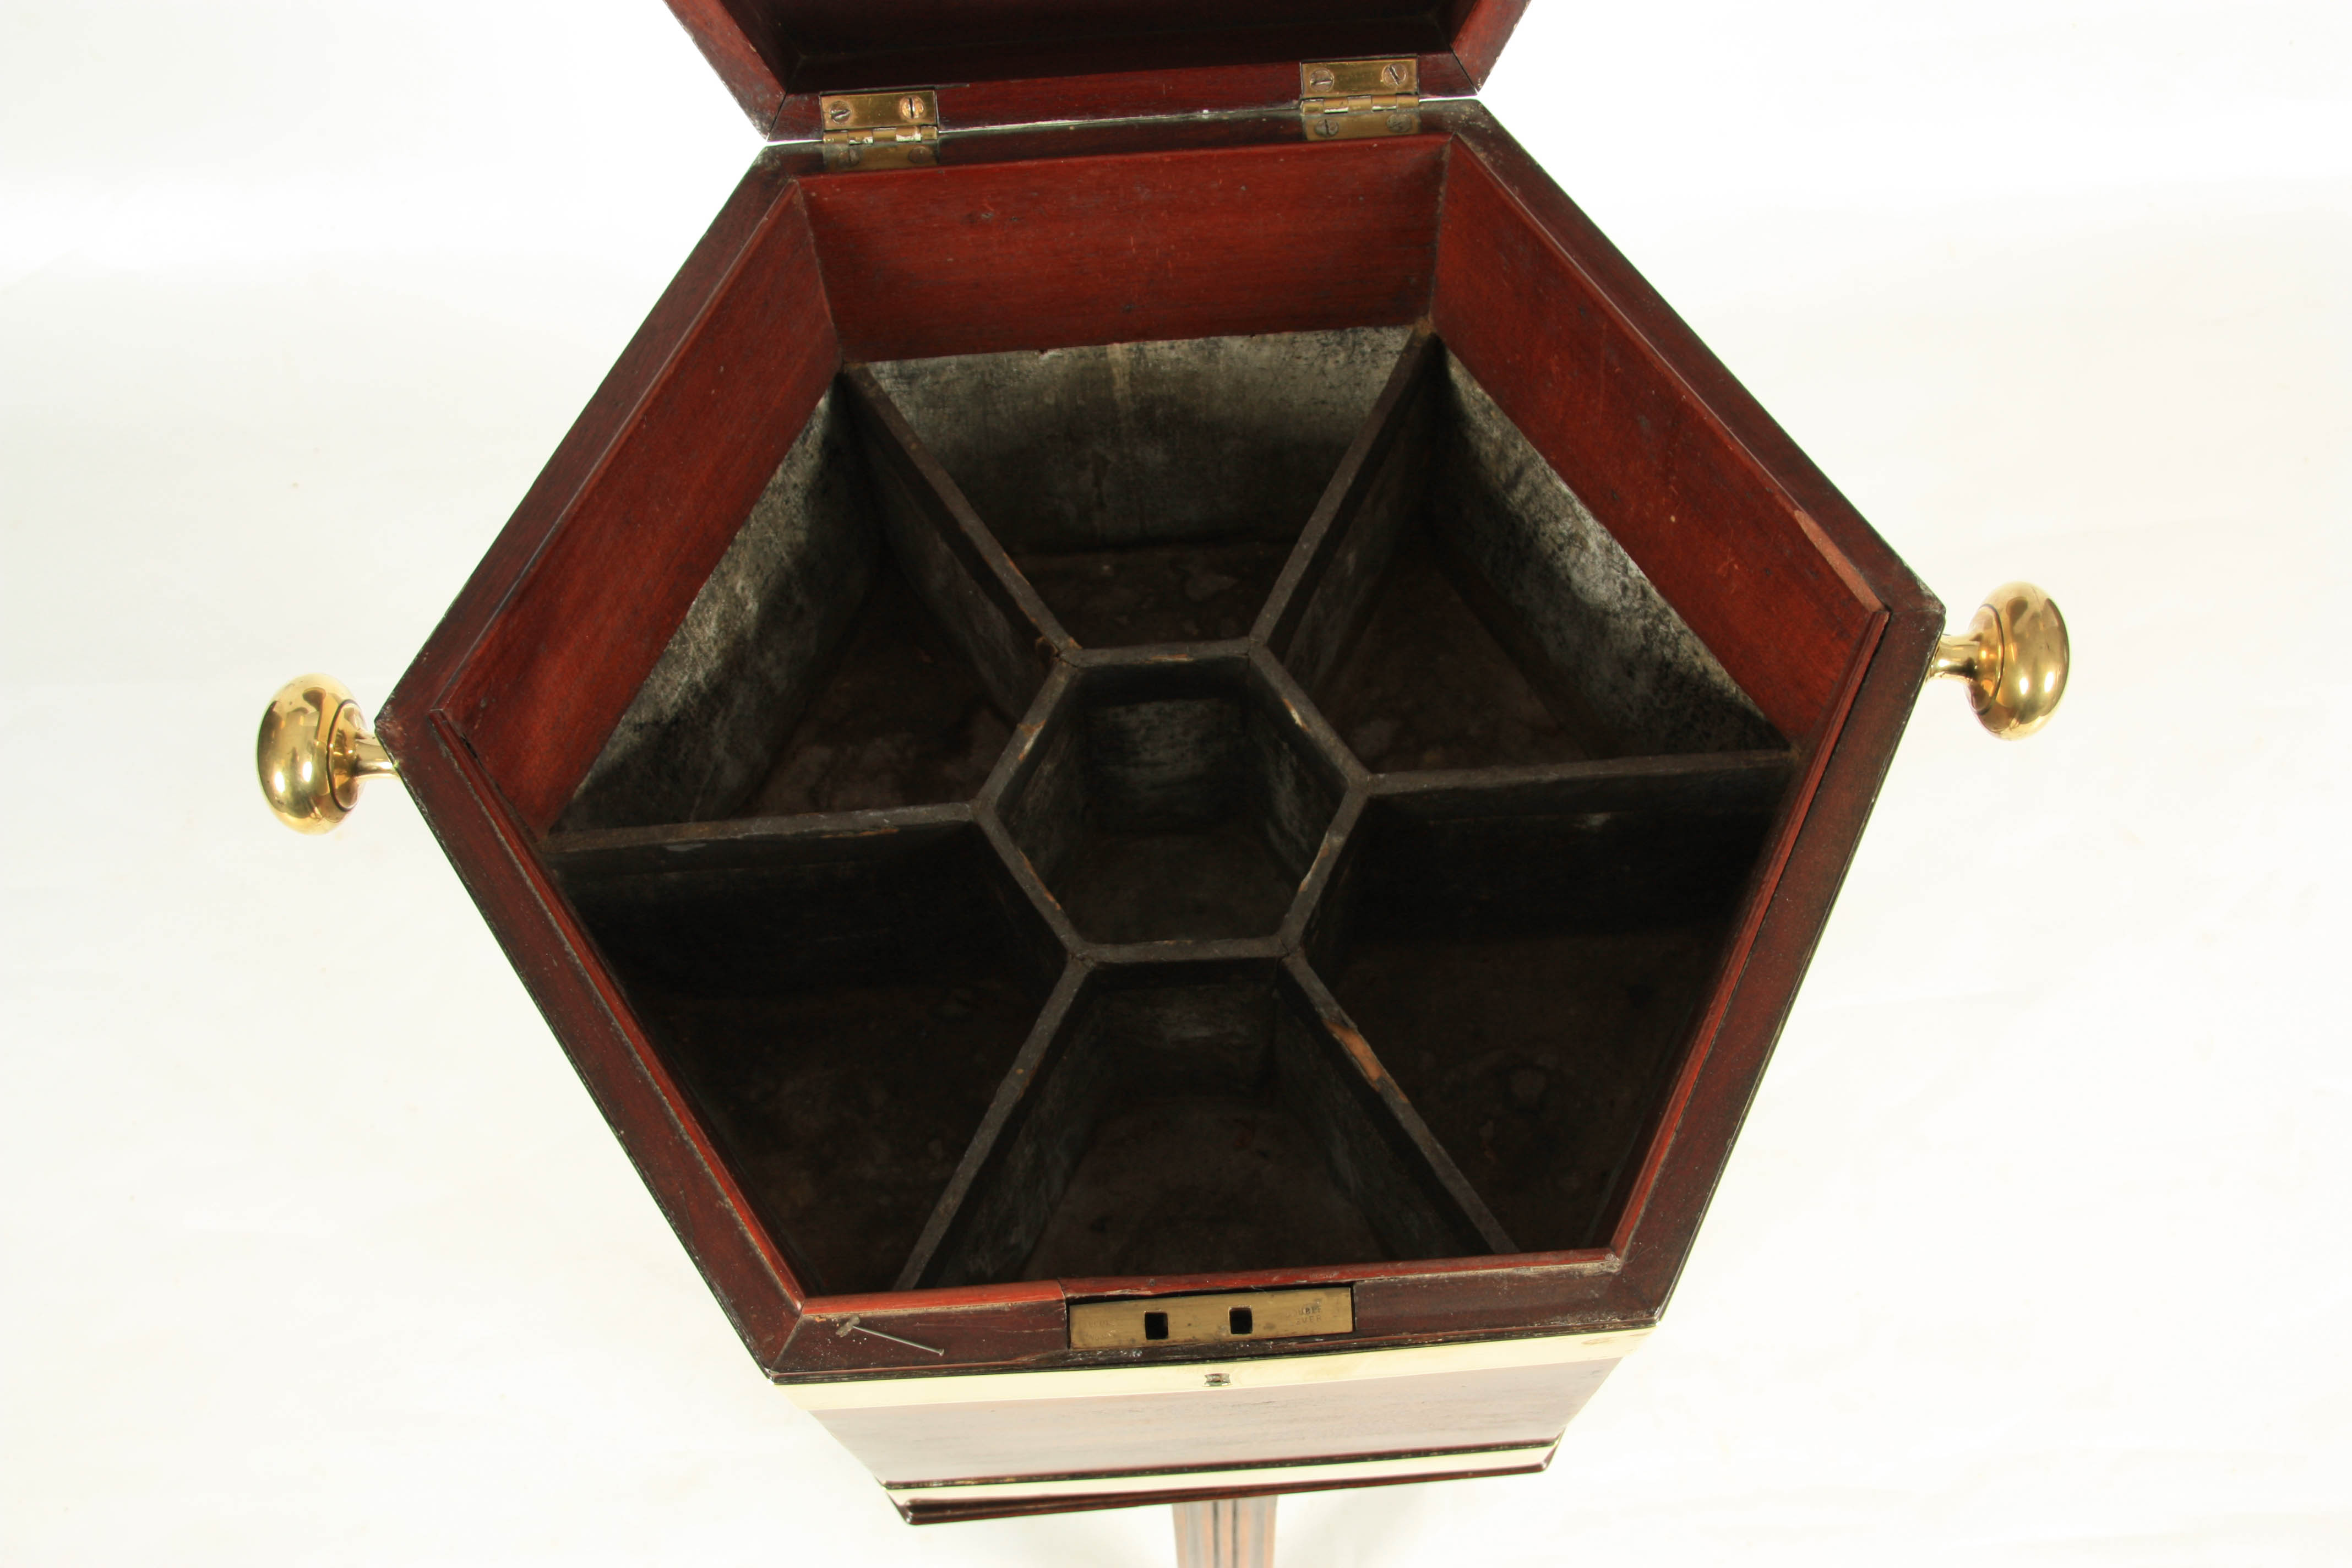 A GEORGE III MAHOGANY BRASS BOUND HEXAGONAL SHAPED CELLARETTE ON STAND with hinged top revealing a - Image 5 of 6